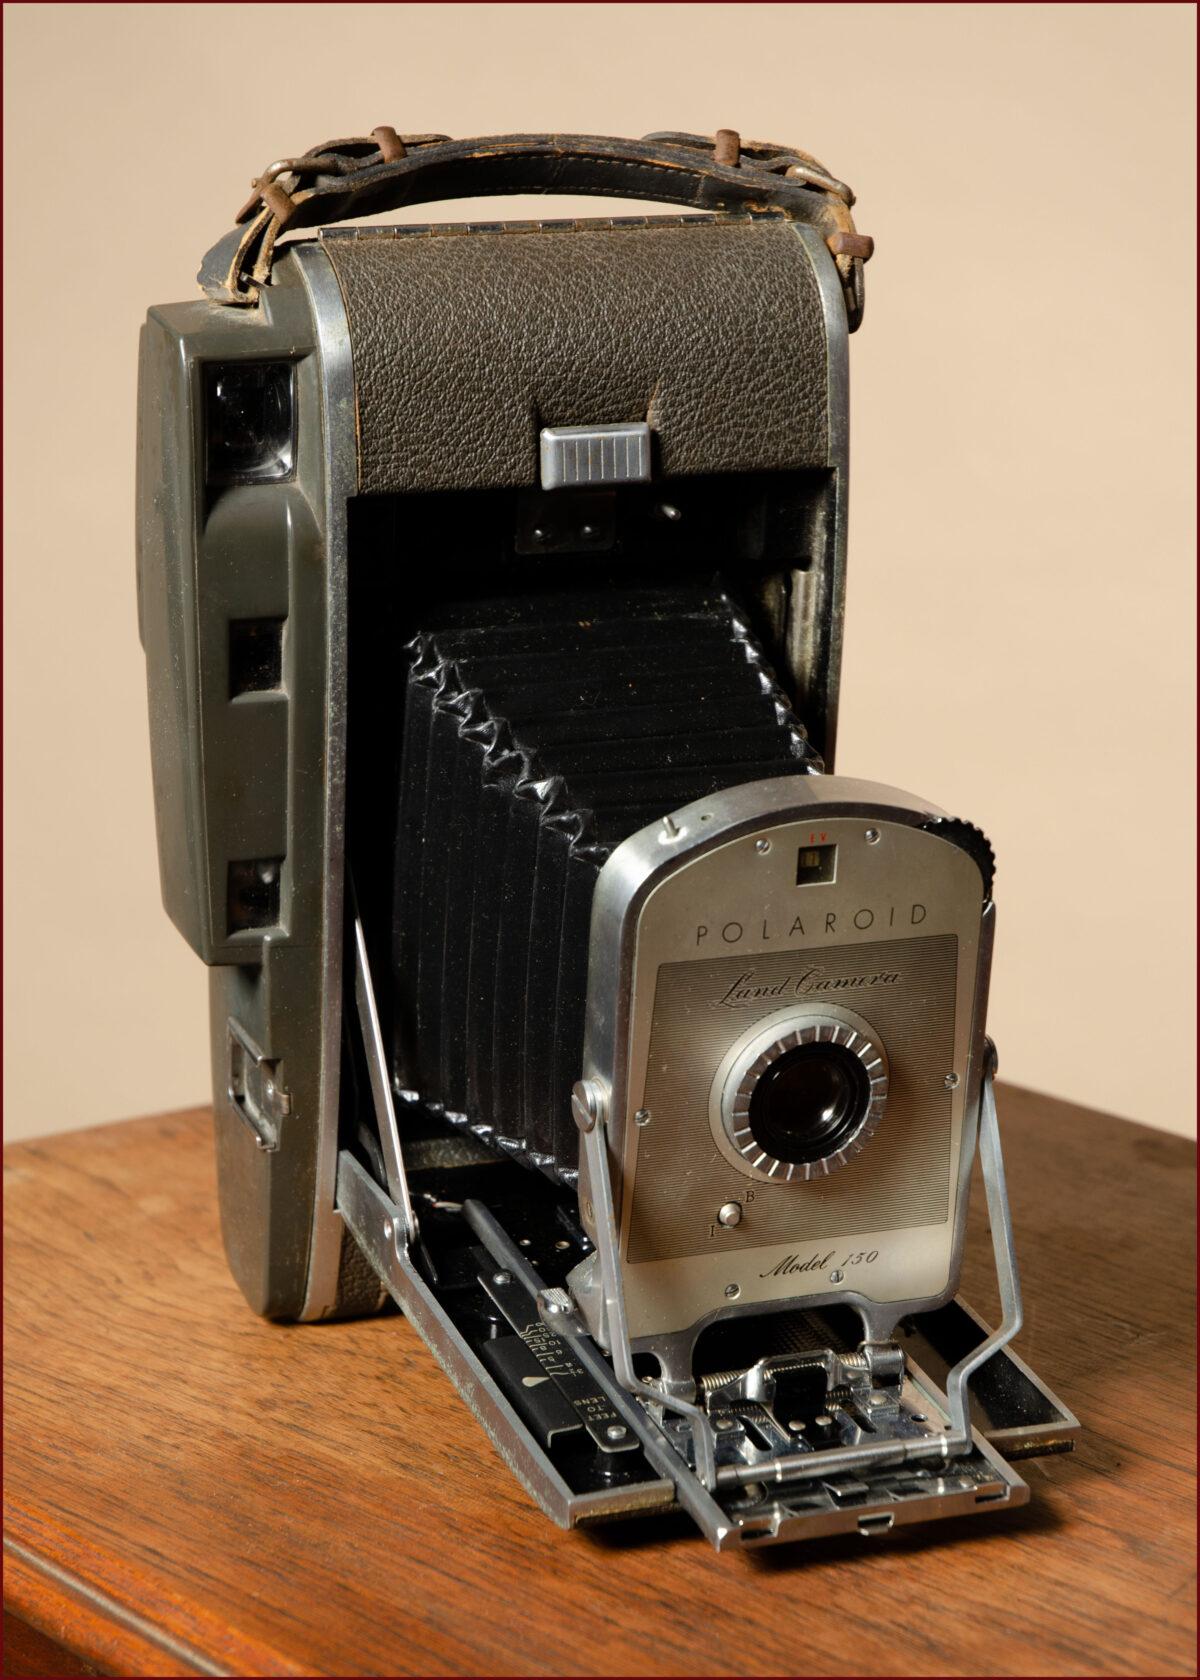 The Polaroid Model 150 from 1957, from the author’s private collection. (Dave Paone)